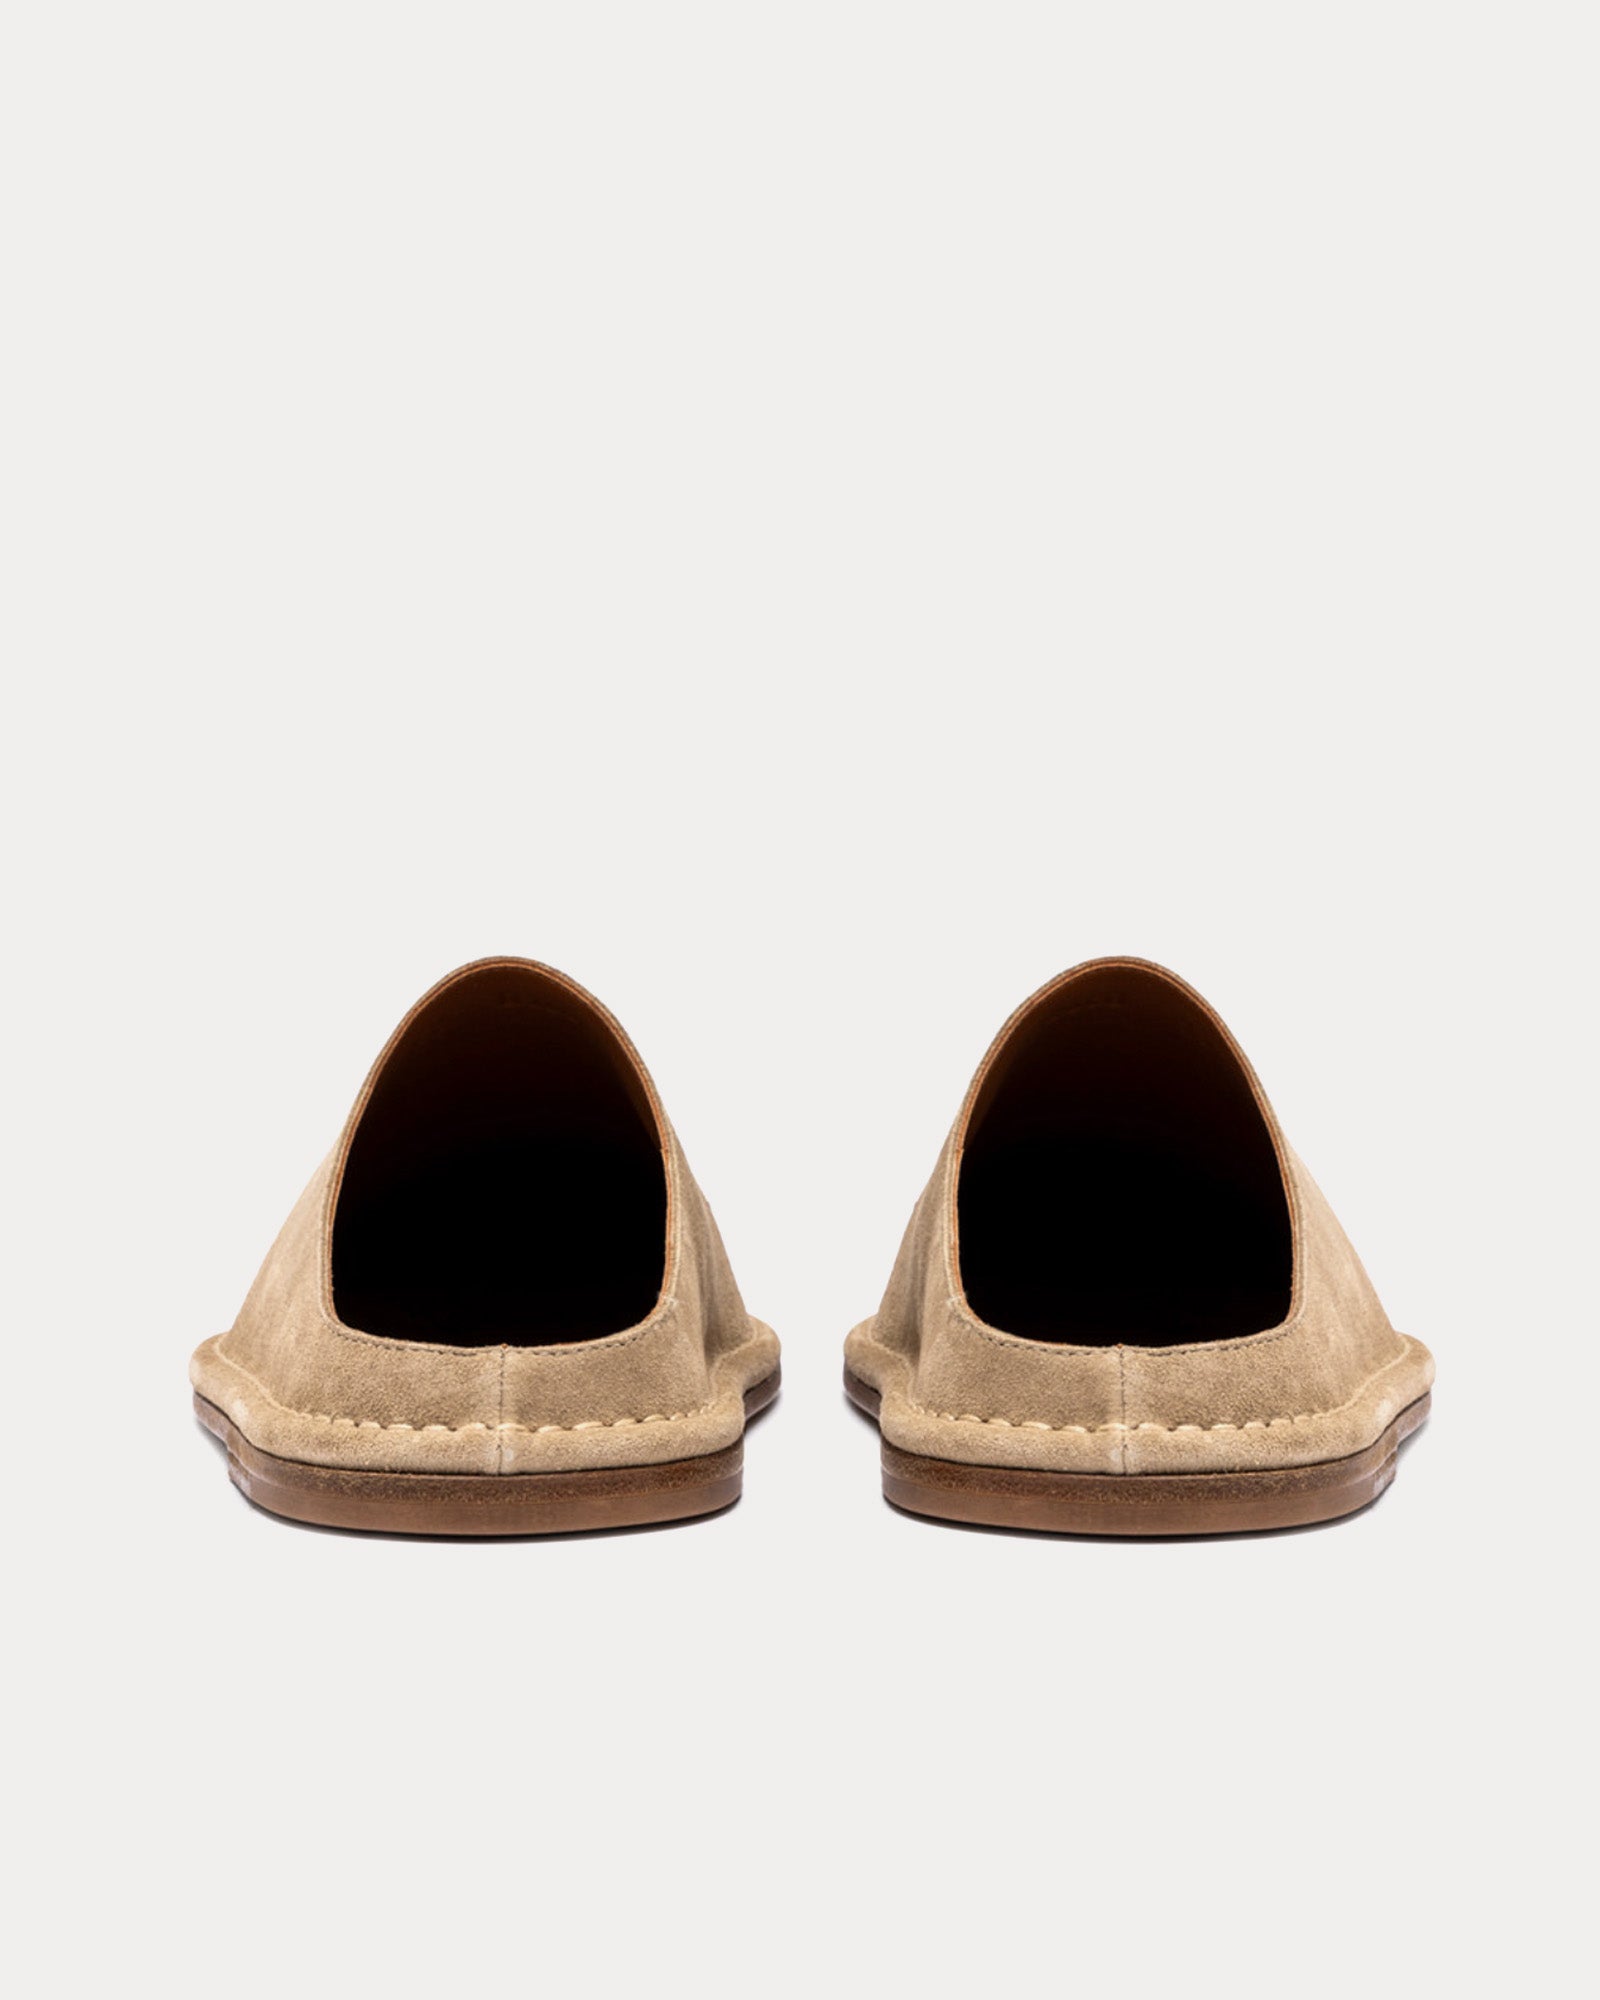 Buttero - Capalbio Suede Beige / Brown Mules